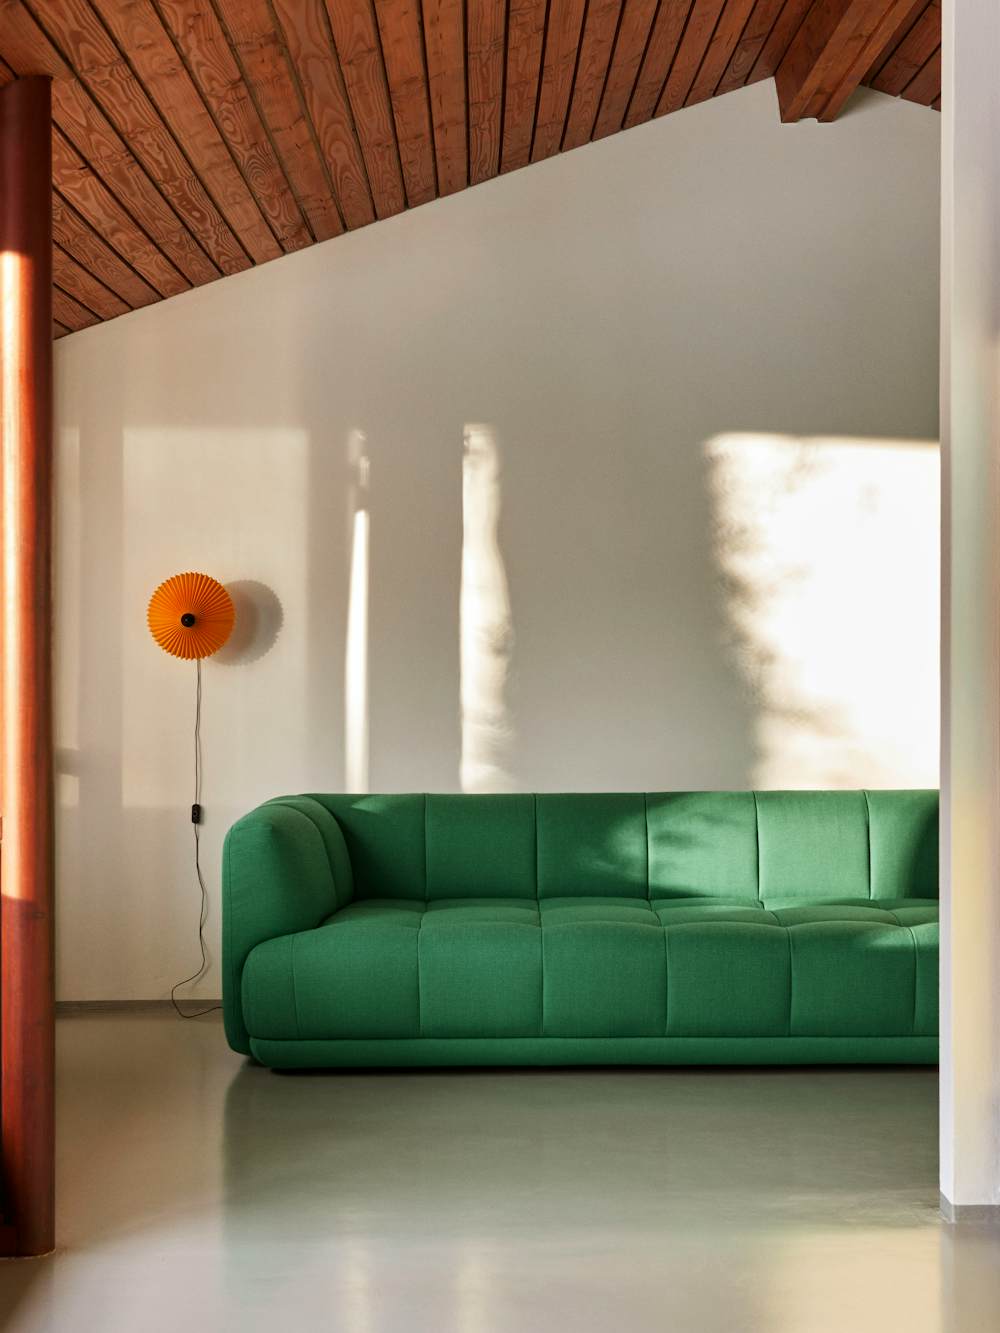 A living space with a green Quilton Sofa and Matin Flushmount Light by Hay.​